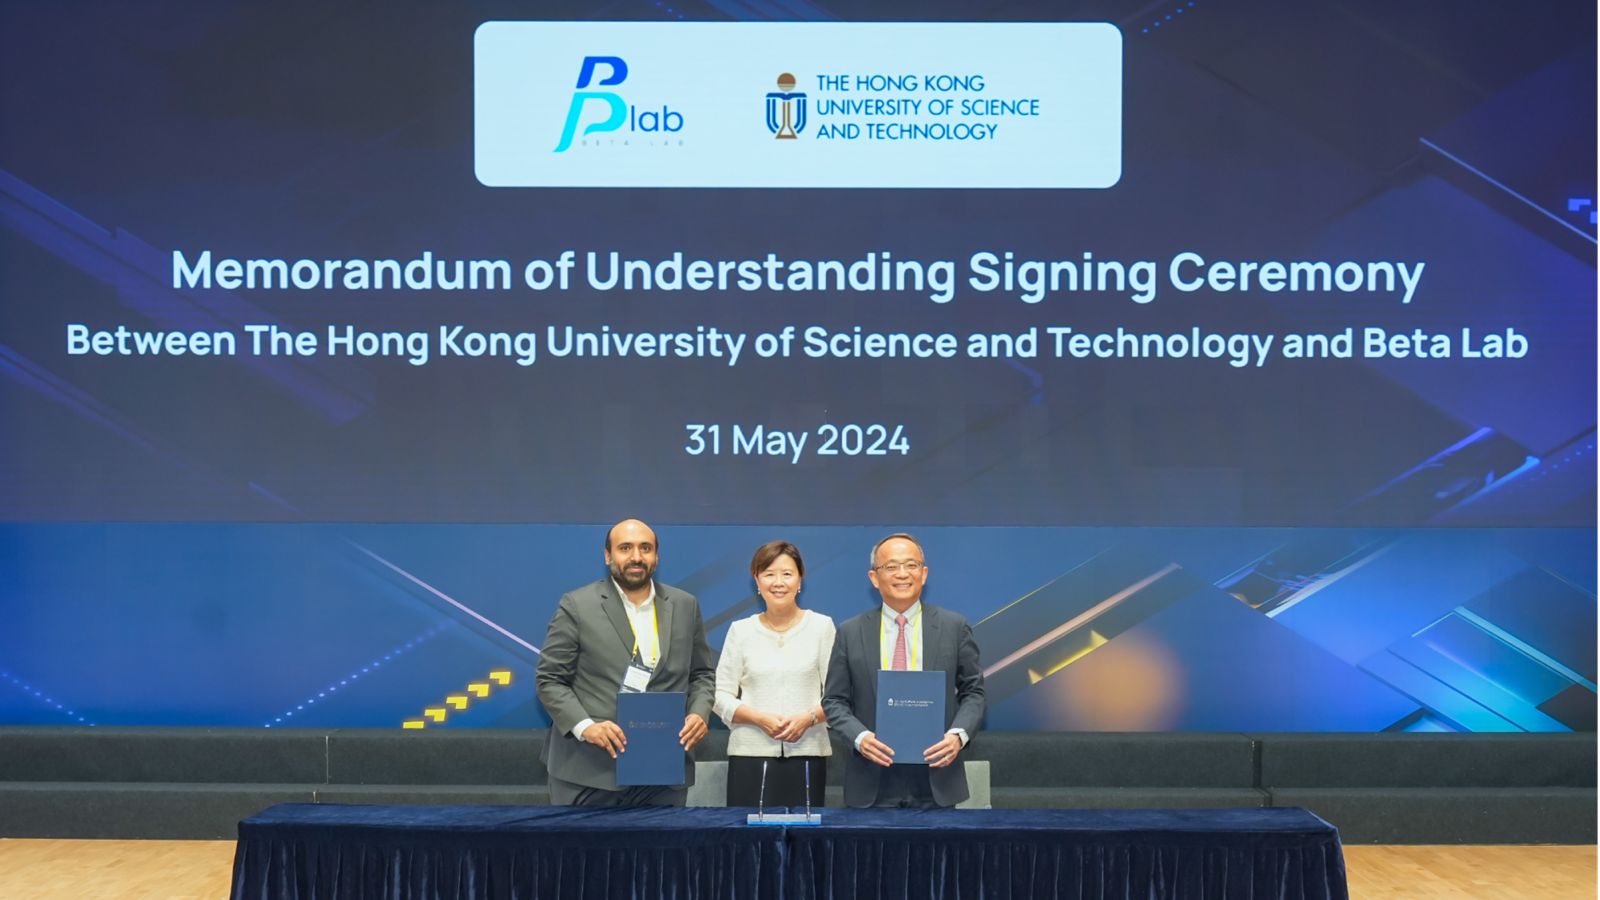 President of the Hong Kong University of Science and Technology Nancy Ip Yuk-yu (center) poses with Beta Lab CEO Abdulrahman Alolayan (left) and HKUST Vice-President for Research and Development Tim Cheng Kwang-ting (right) after the signing of cooperation agreements and memorandums of understanding on May 31, 2024. (PROVIDED TO CHINA DAILY)